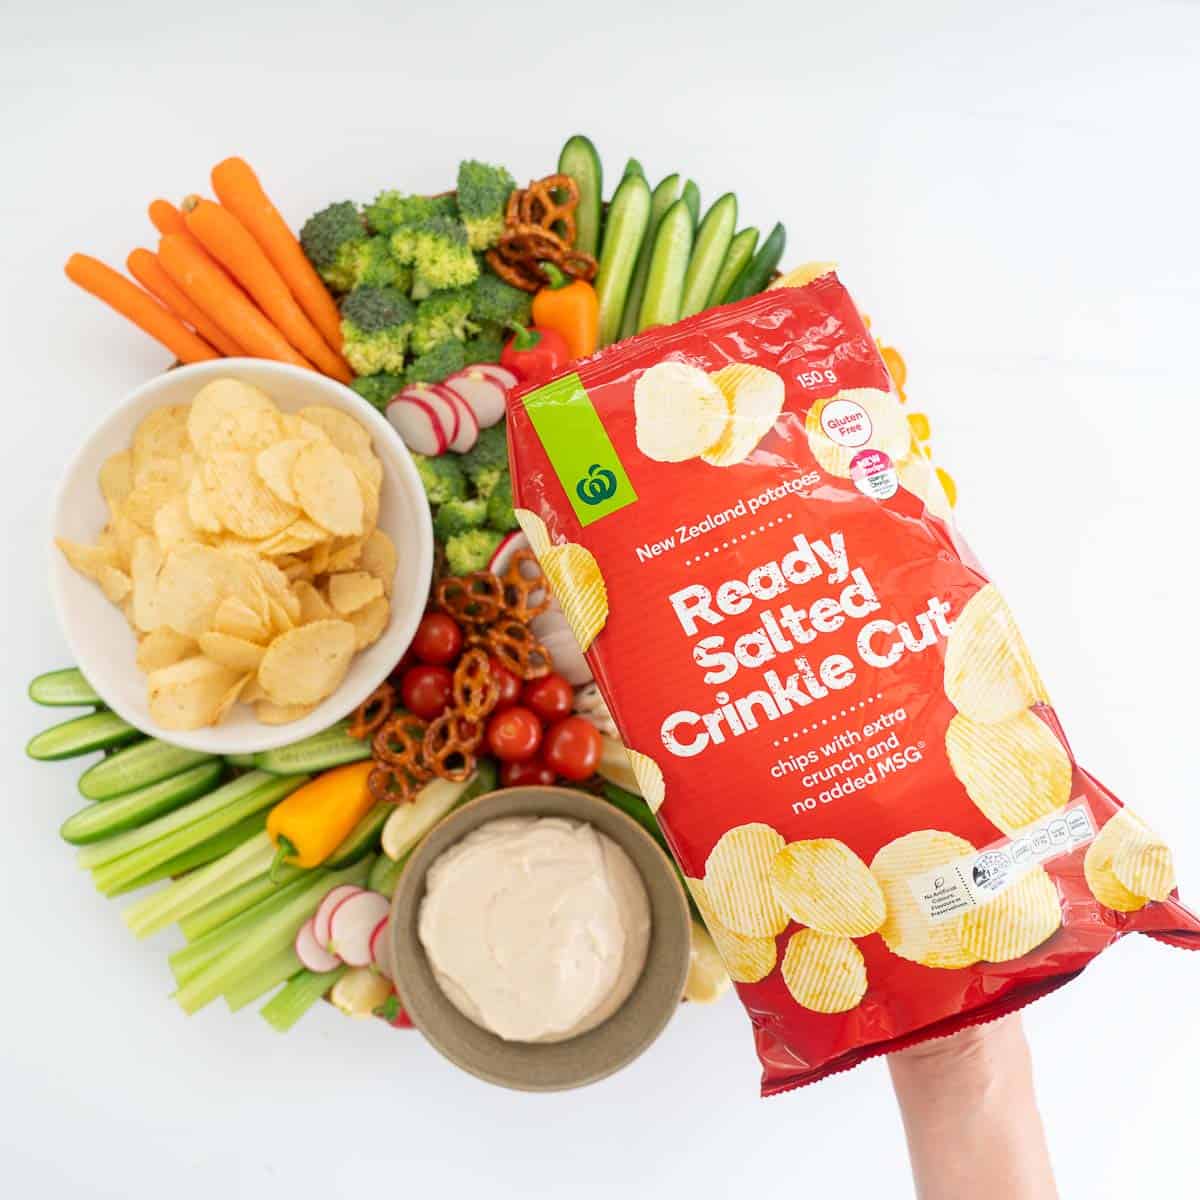 A bag of ready salted chips being held above a platter of fresh crudité